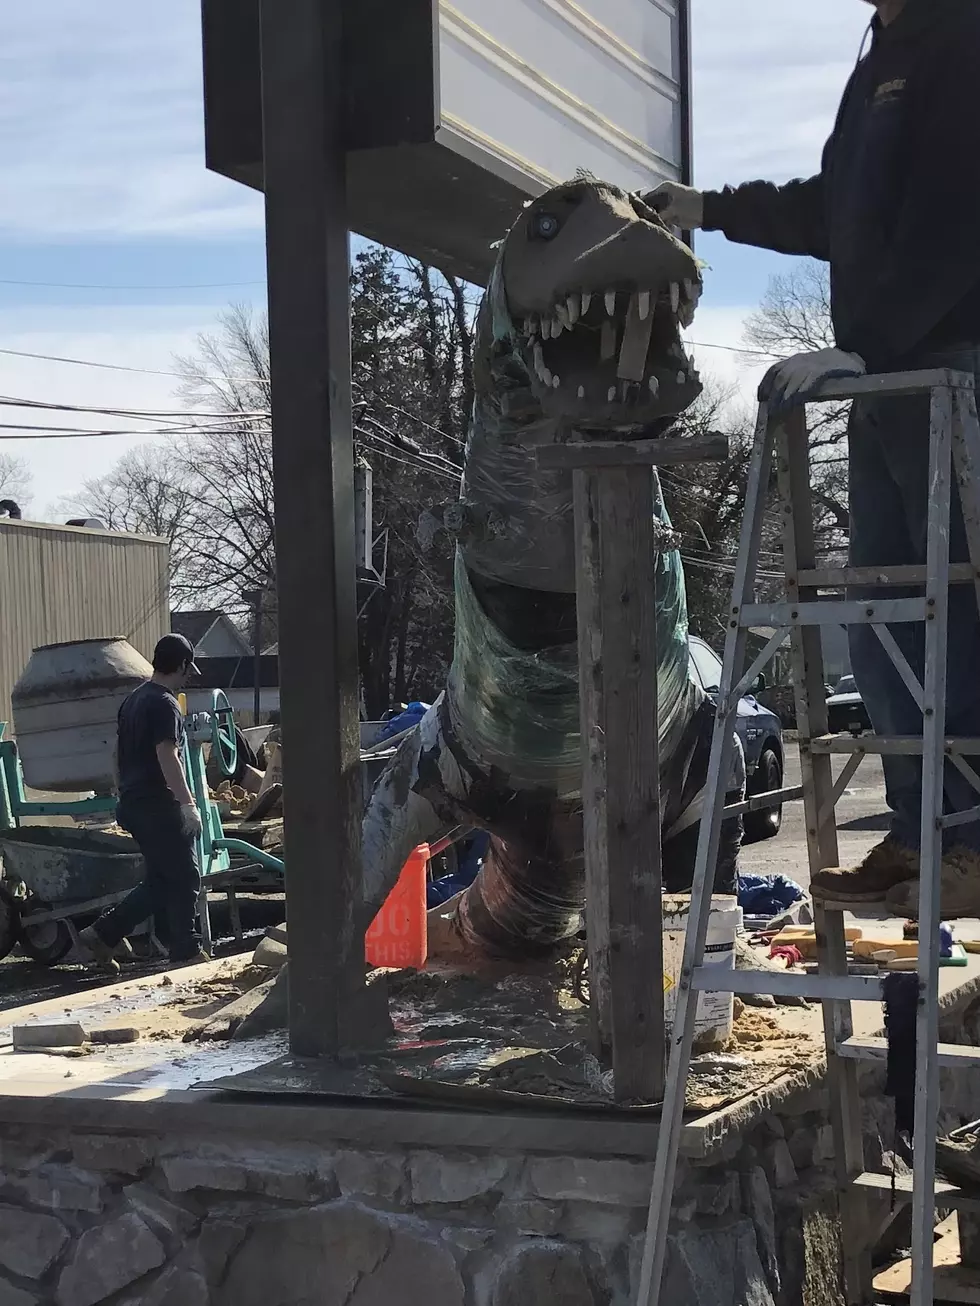 UPDATE – What’s Up with the Dinosaur in Beachwood?